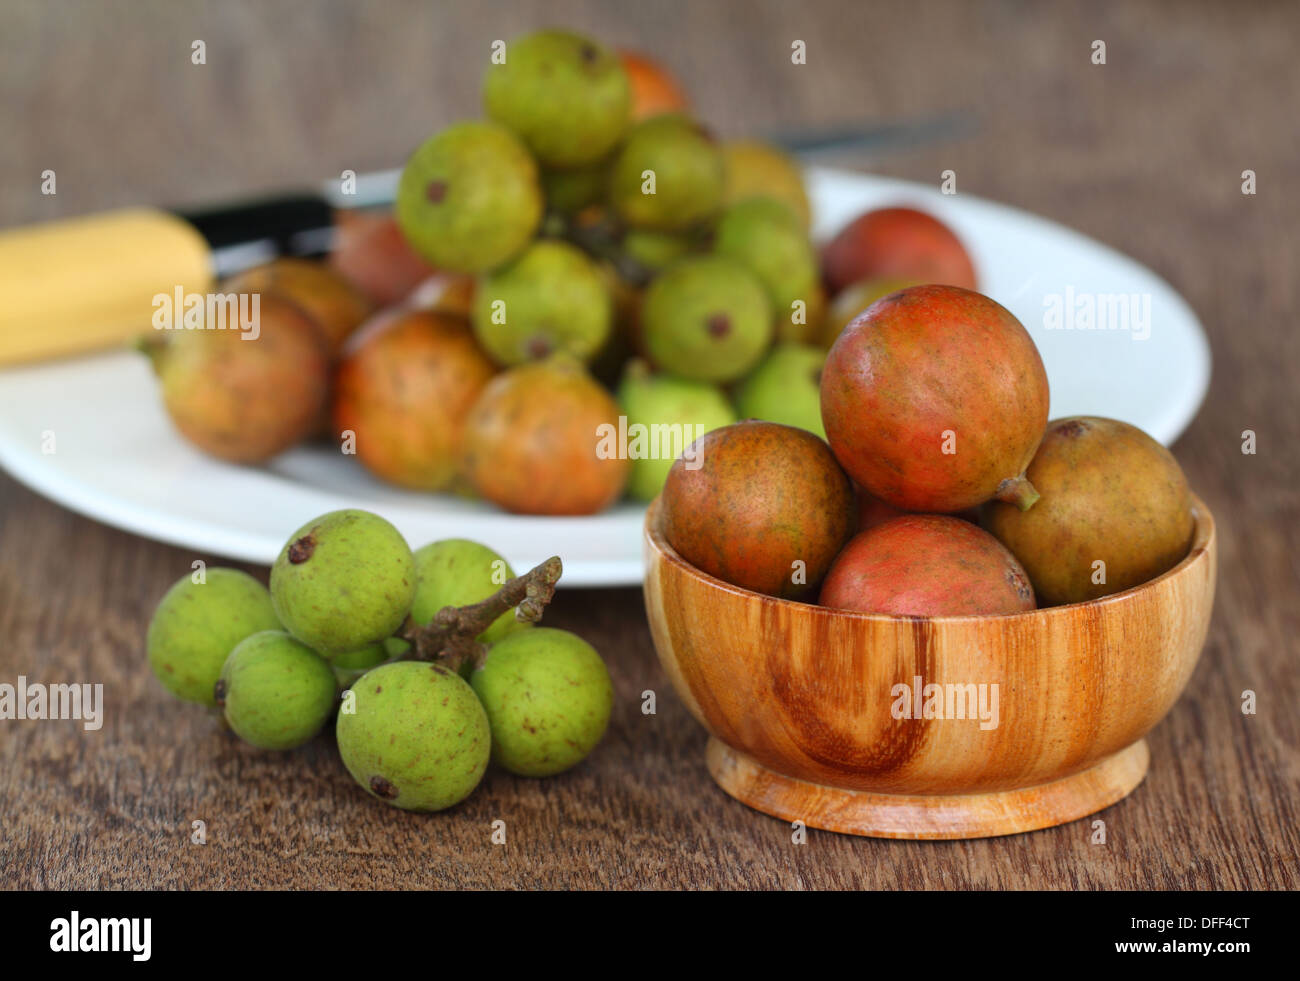 India figs named as Dumur fruit Stock Photo